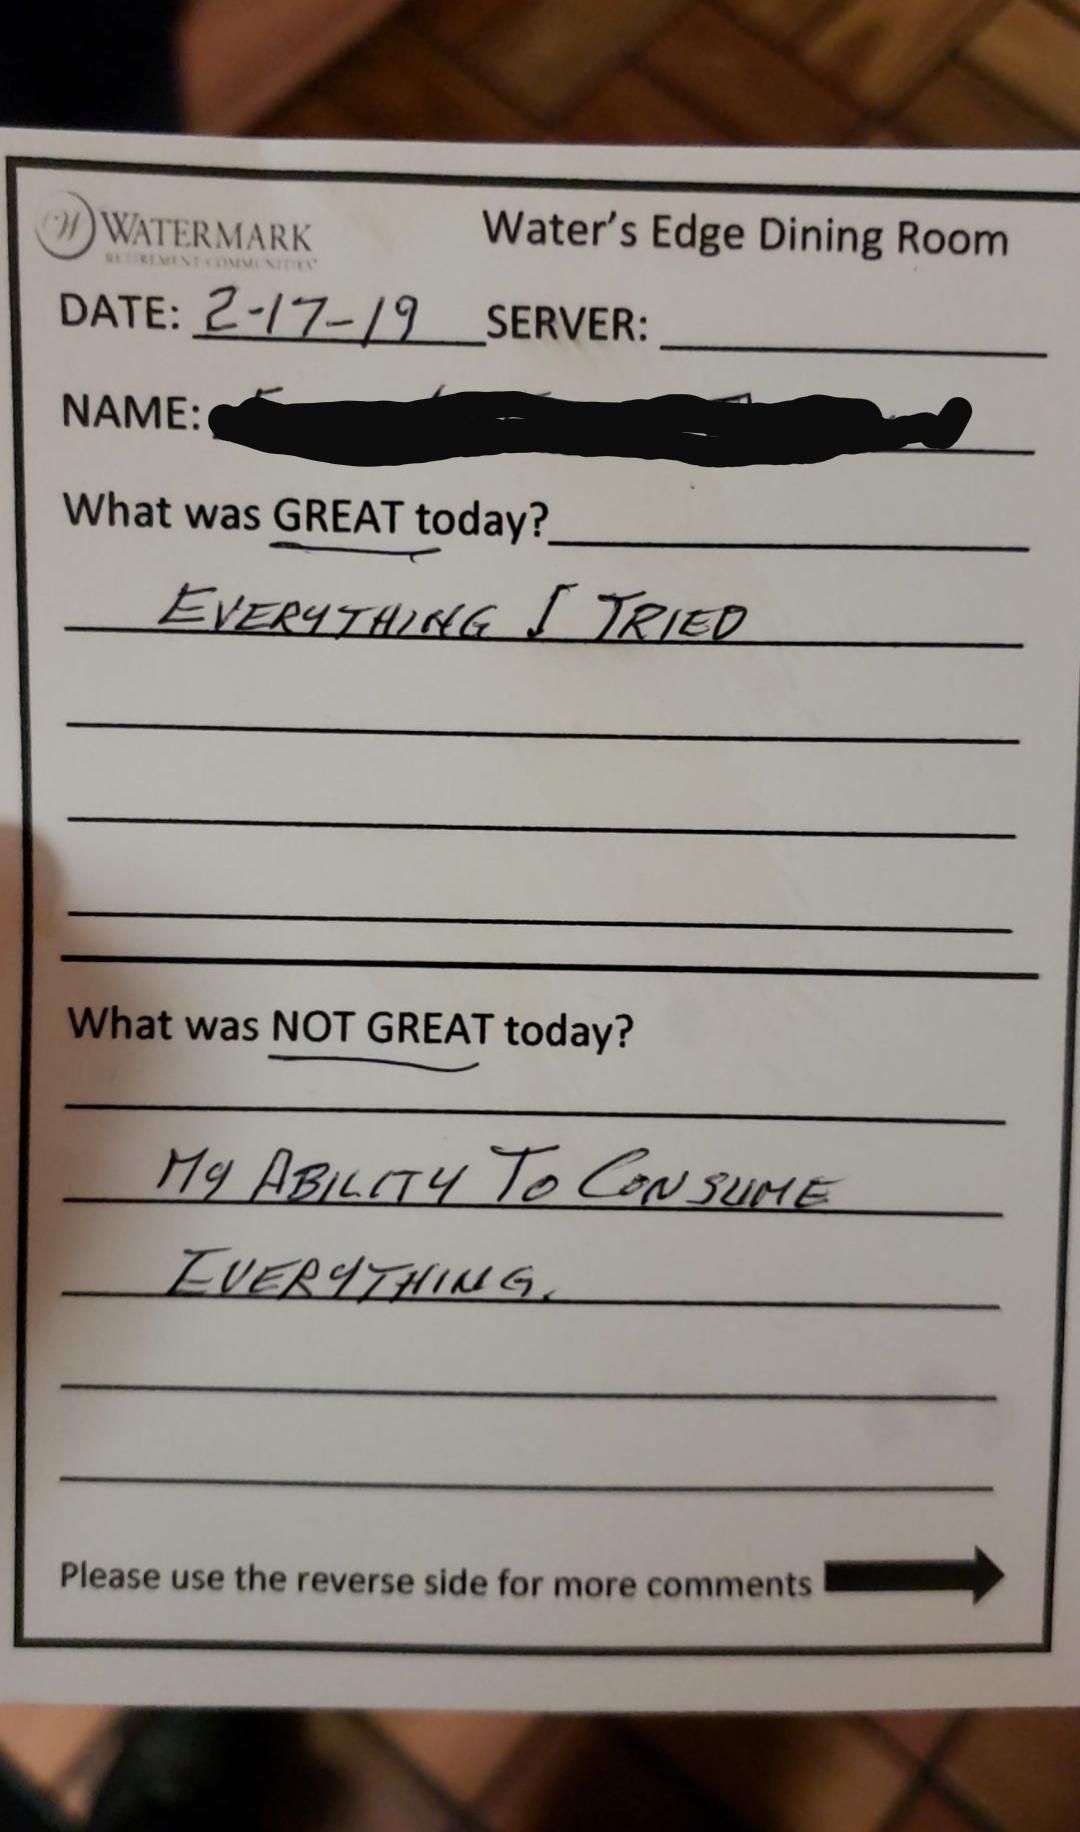 A comment card left at the table today